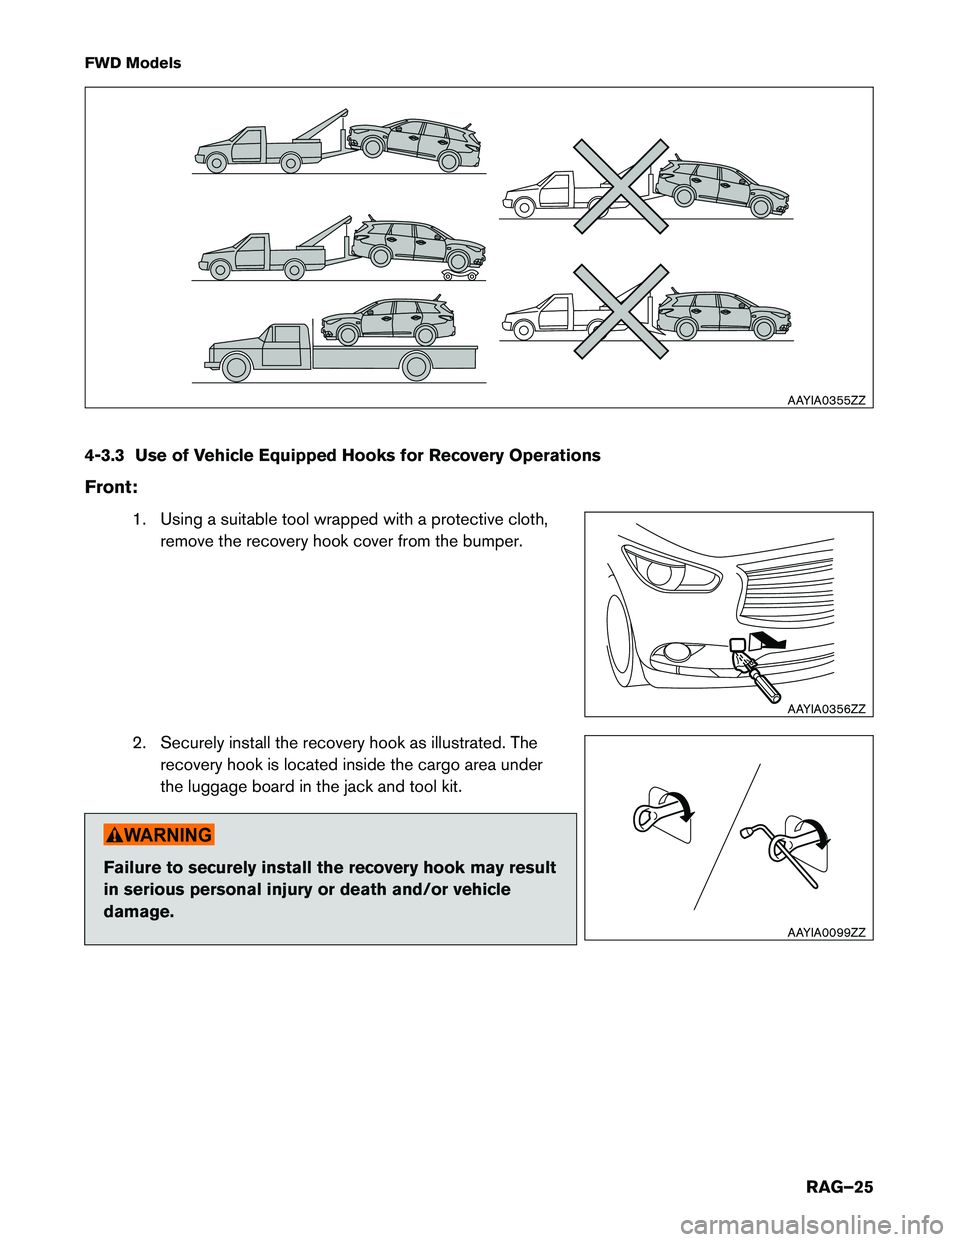 INFINITI QX60 HYBRID 2015  Roadside Assistance Guide FWD Models 
4-3.3 Use of Vehicle Equipped Hooks for Recovery Operations 
Front:1. Using a suitable tool wrapped with a protective cloth,remove the recovery hook cover from the bumper.
2. Securely inst